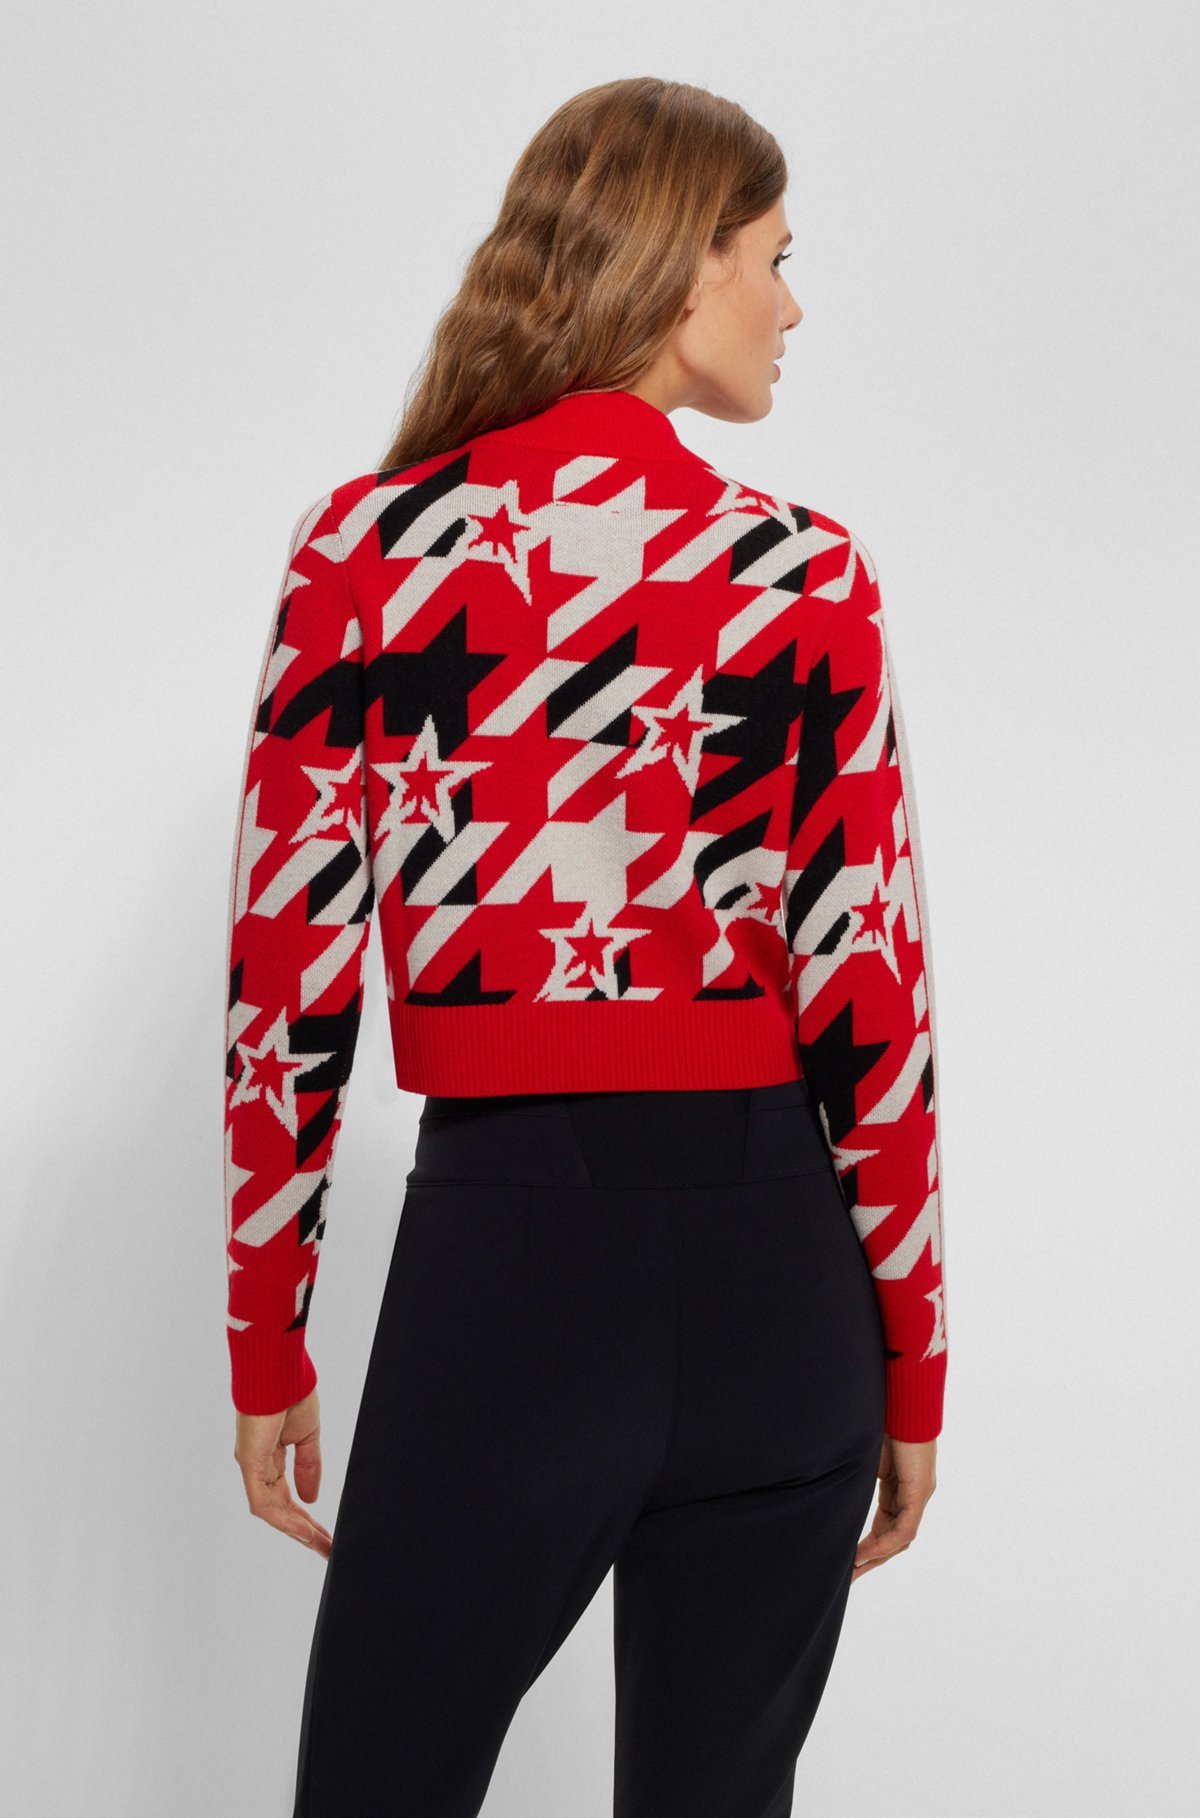 BOSS x Perfect Moment virgin-wool sweater with houndstooth motif, Red Patterned